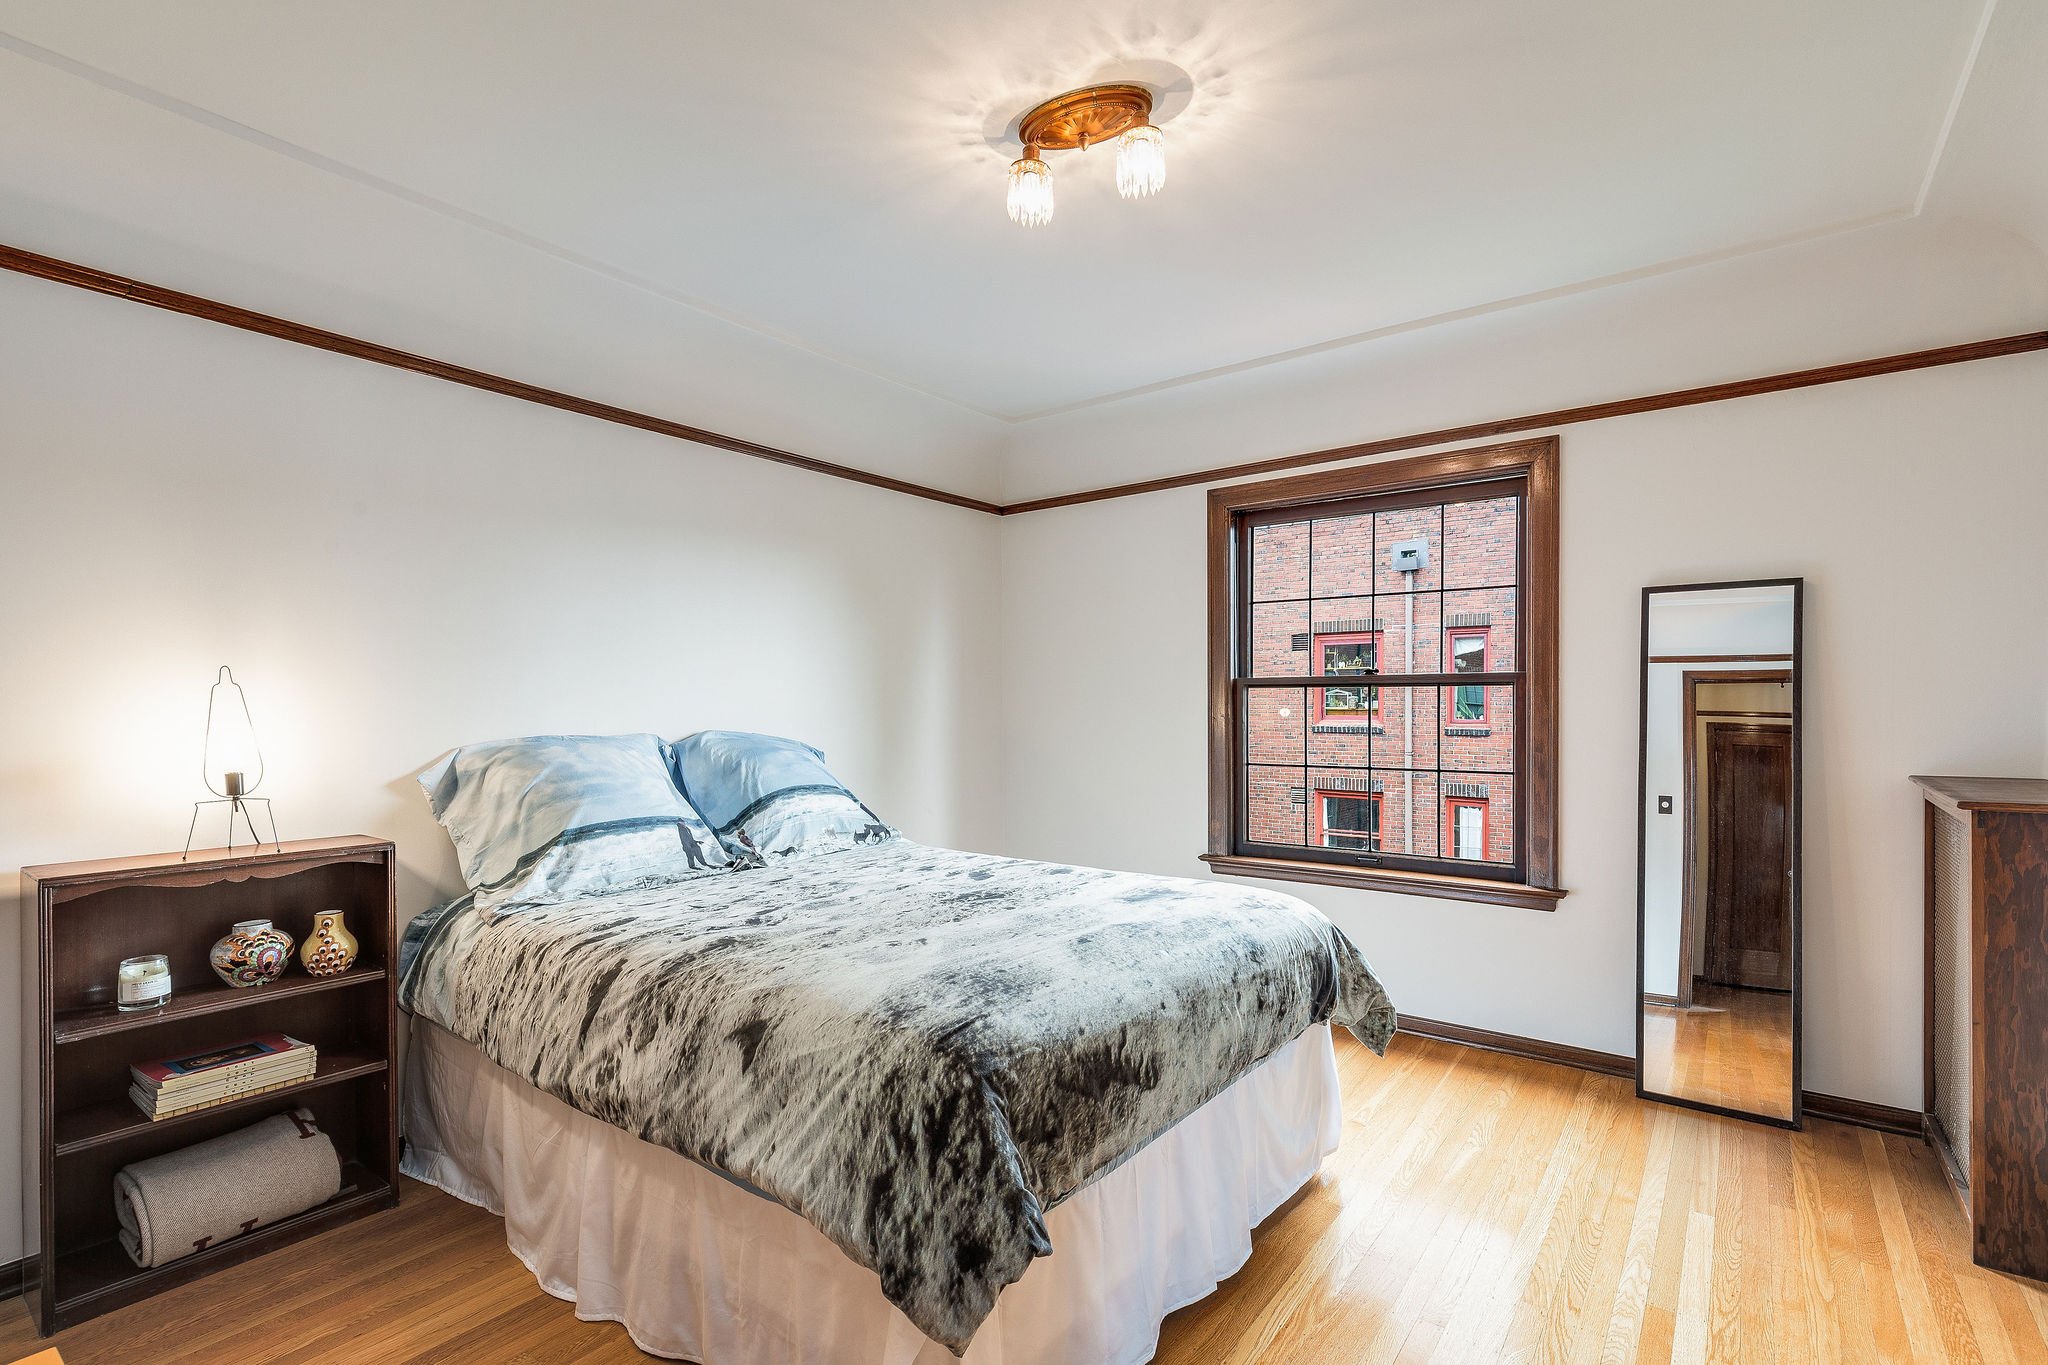 The 788 sqft home allows for a large bedroom that can easily accommodate a king-sized bed. All original light fixtures are in beautiful shape throughout the home. 